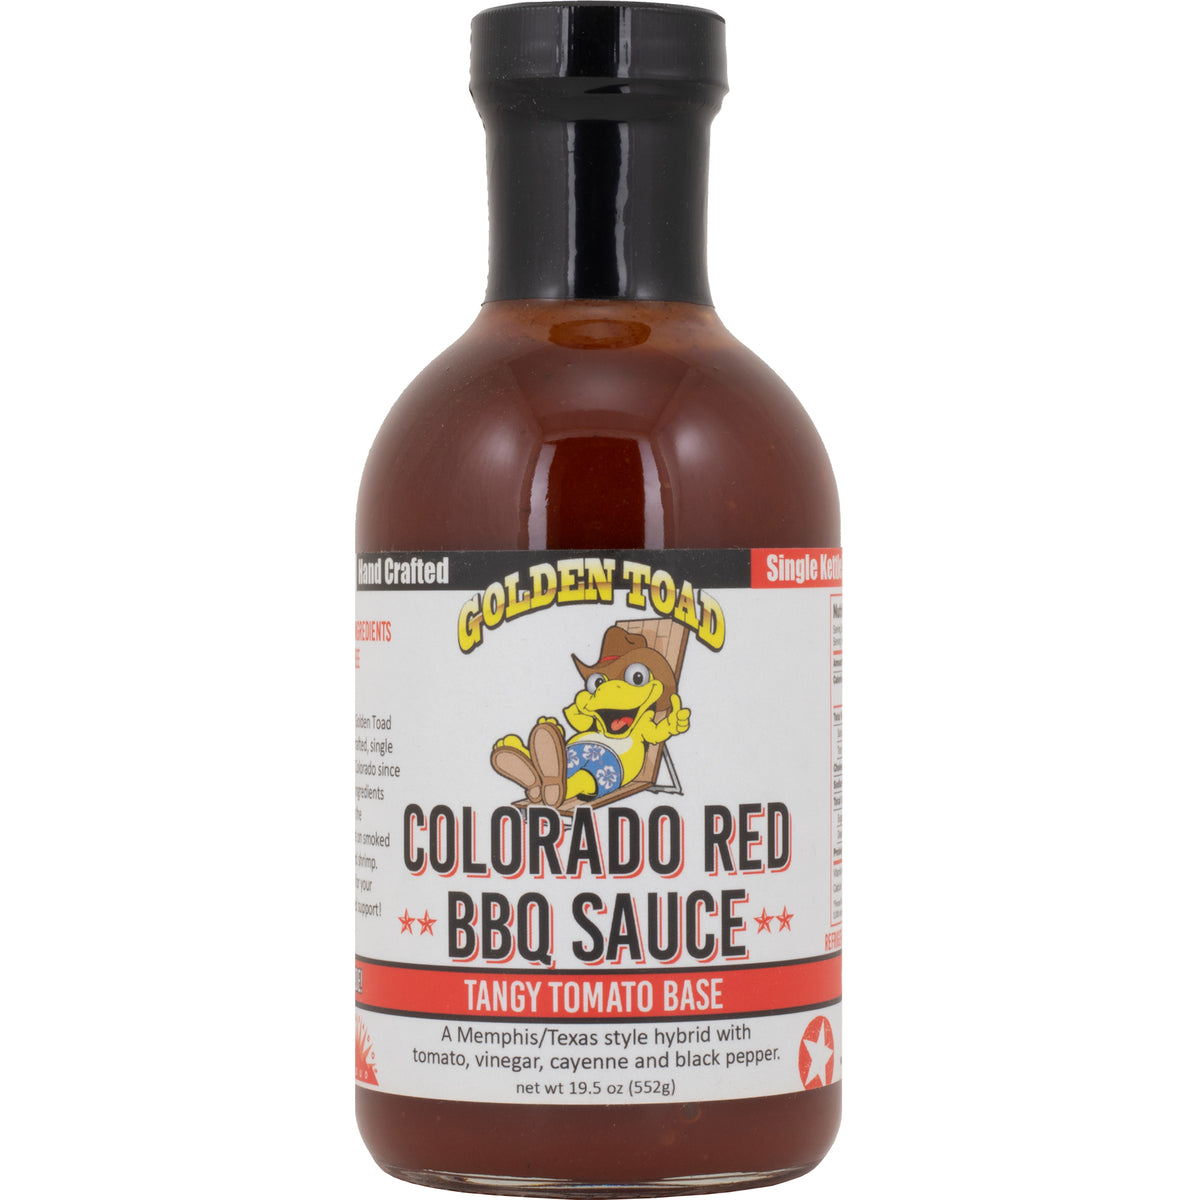 Golden Toad Colorado Red BBQ Sauce